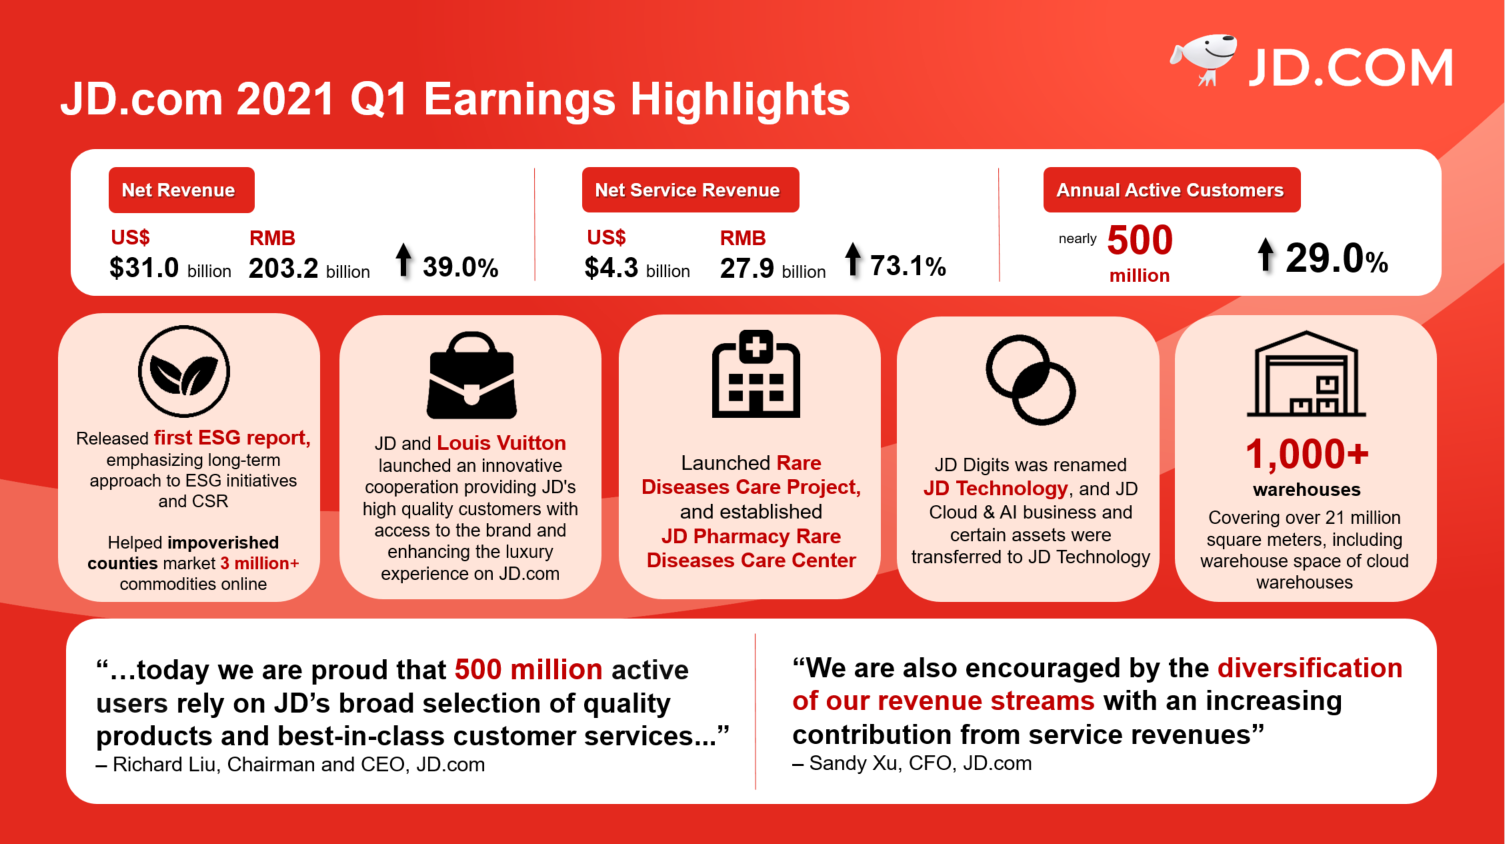 JD.com released its first quarter 2021 earnings results.